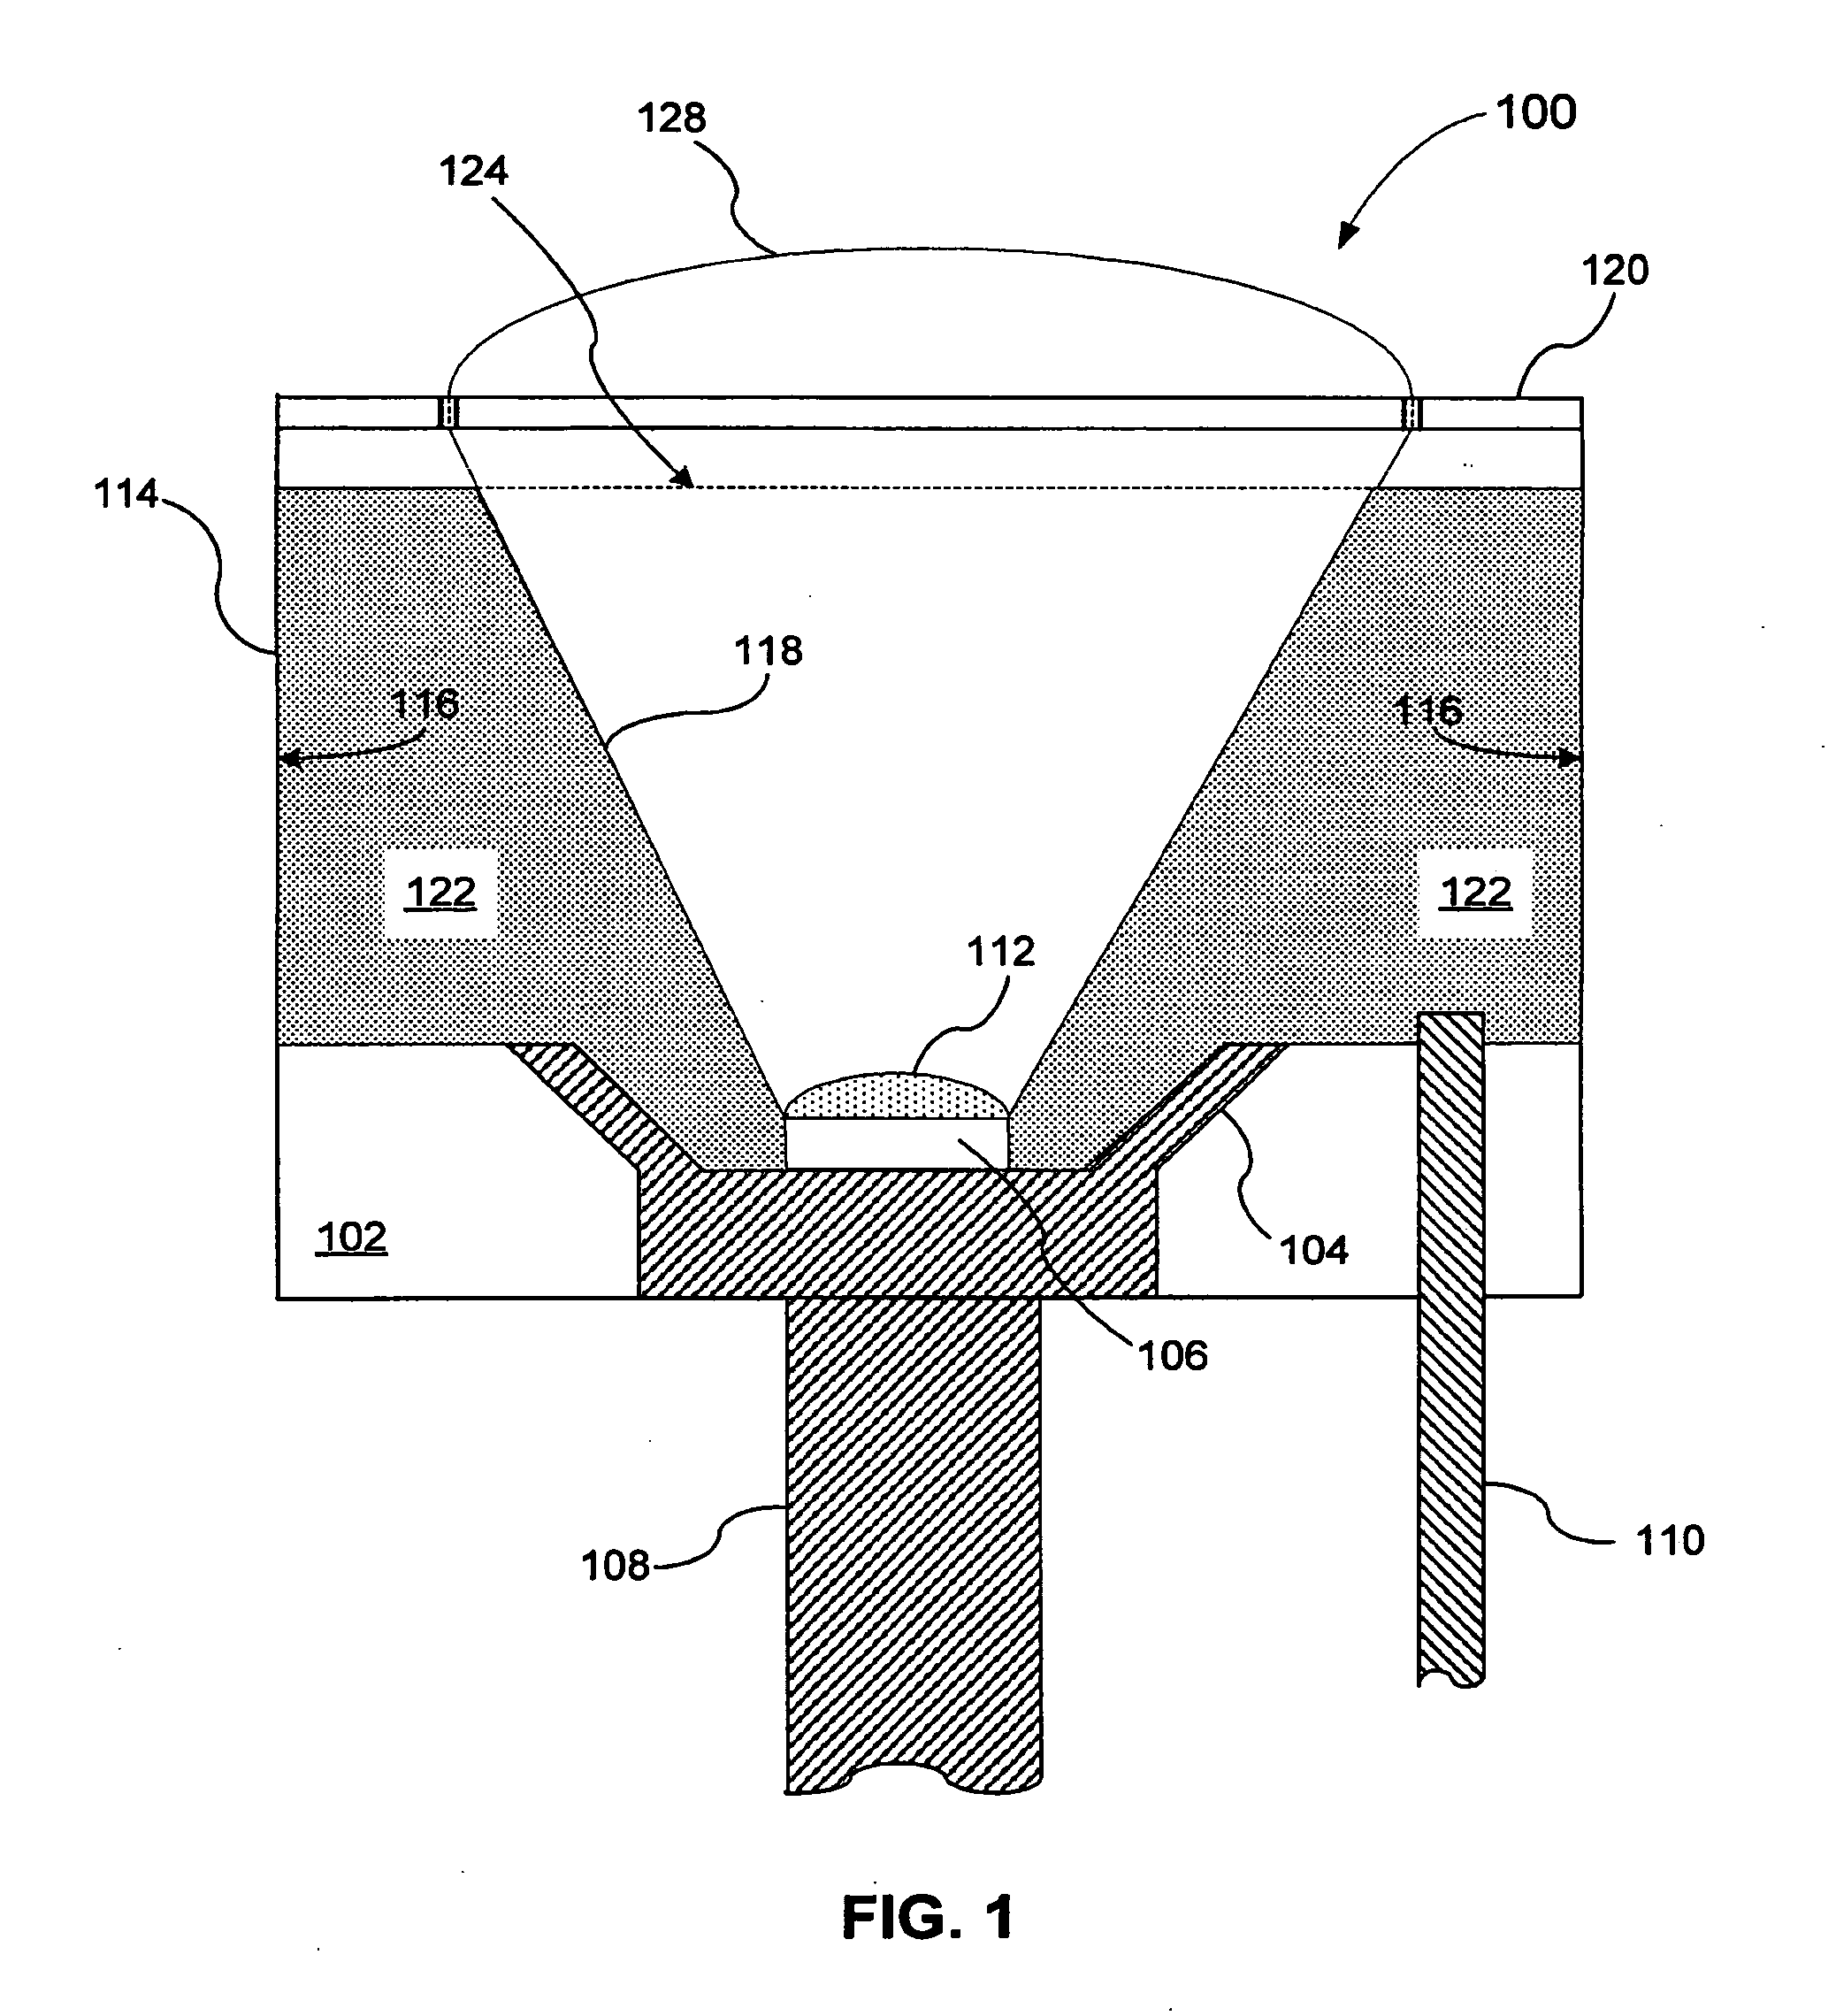 Light emitting device having a metal can package for improved heat dissipation